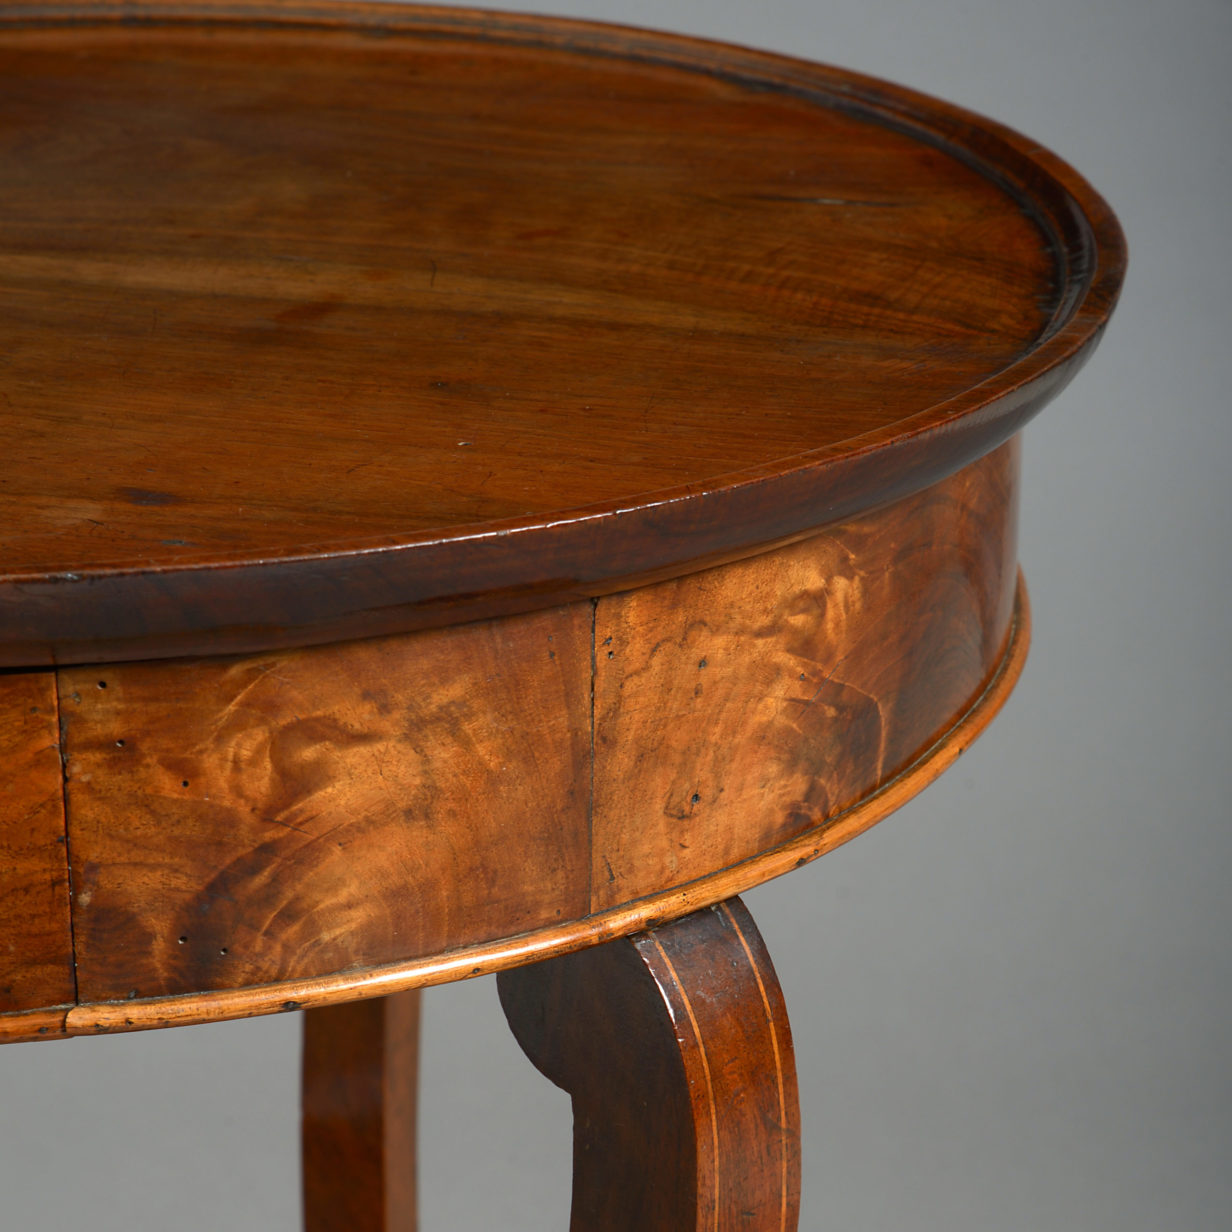 An early 19th century louis philippe period walnut gueridon